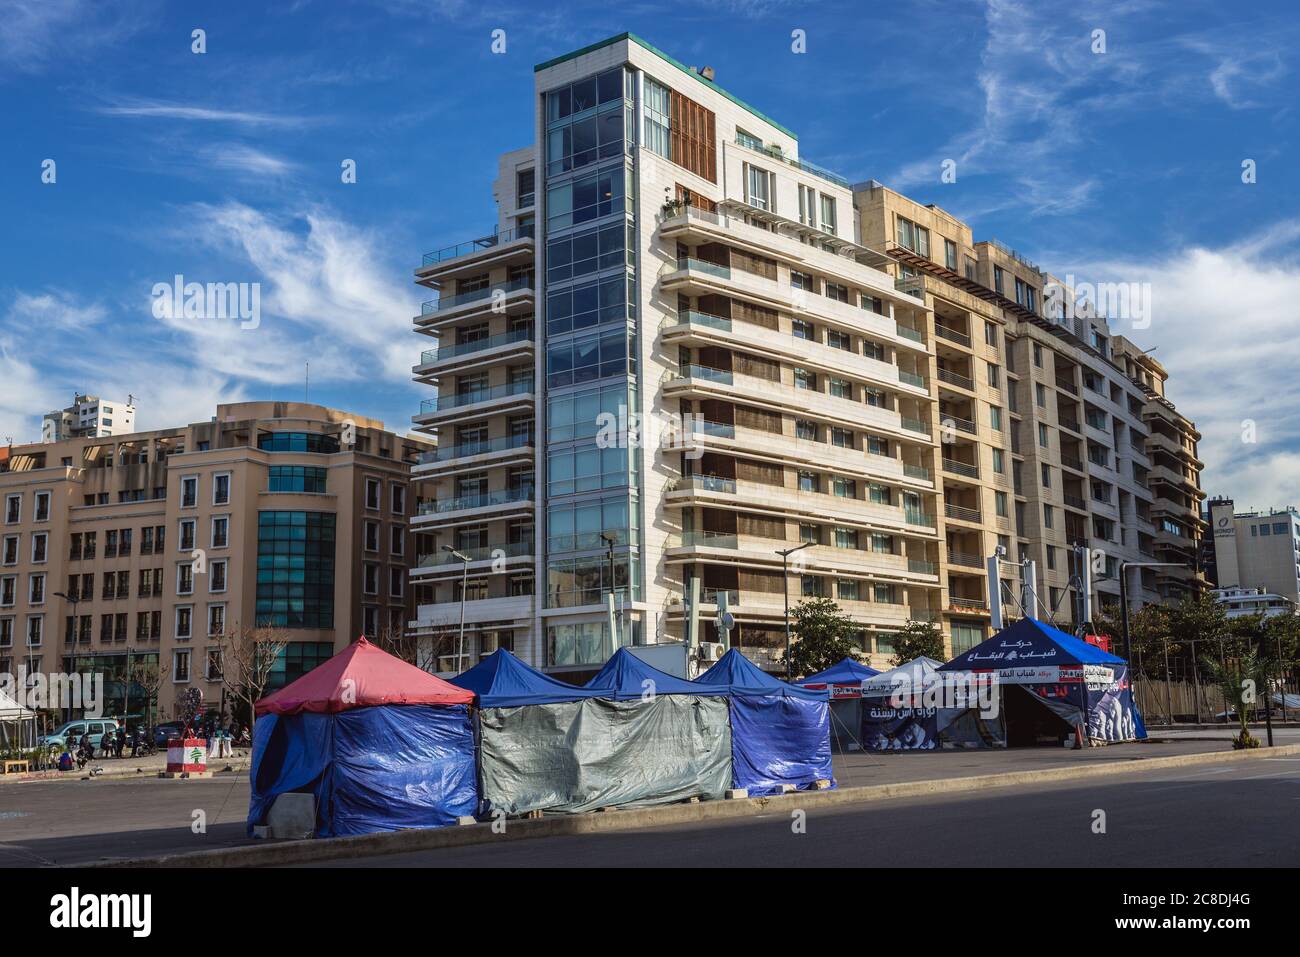 Tent town of October Revolution protesters on the Martyrs Square in central Beirut, Lebanon Stock Photo